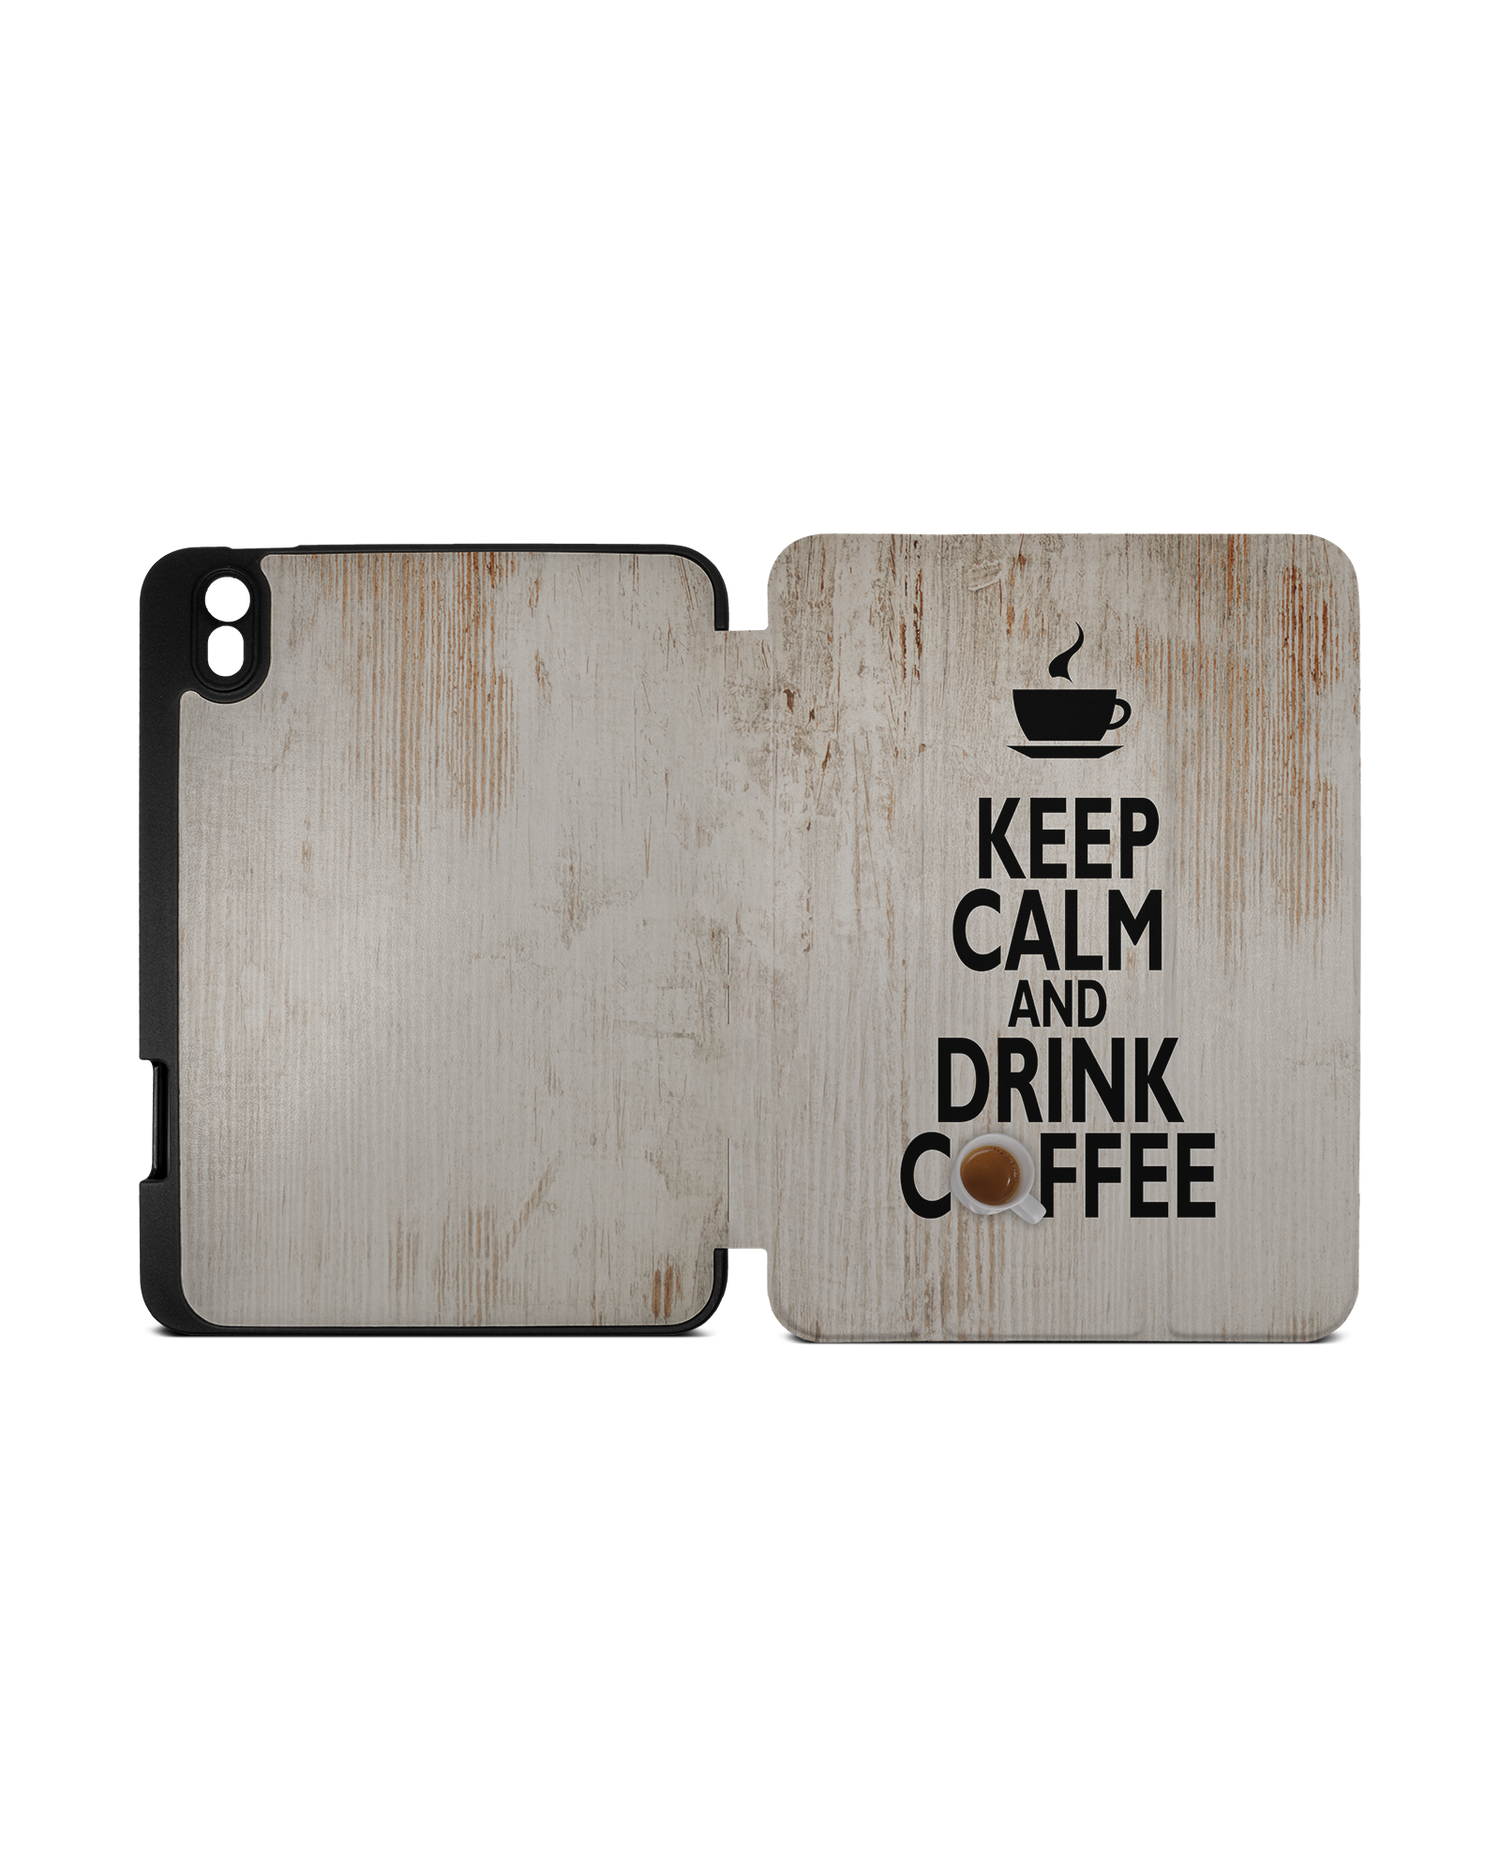 Drink Coffee iPad Case with Pencil Holder Apple iPad mini 6 (2021): Opened exterior view